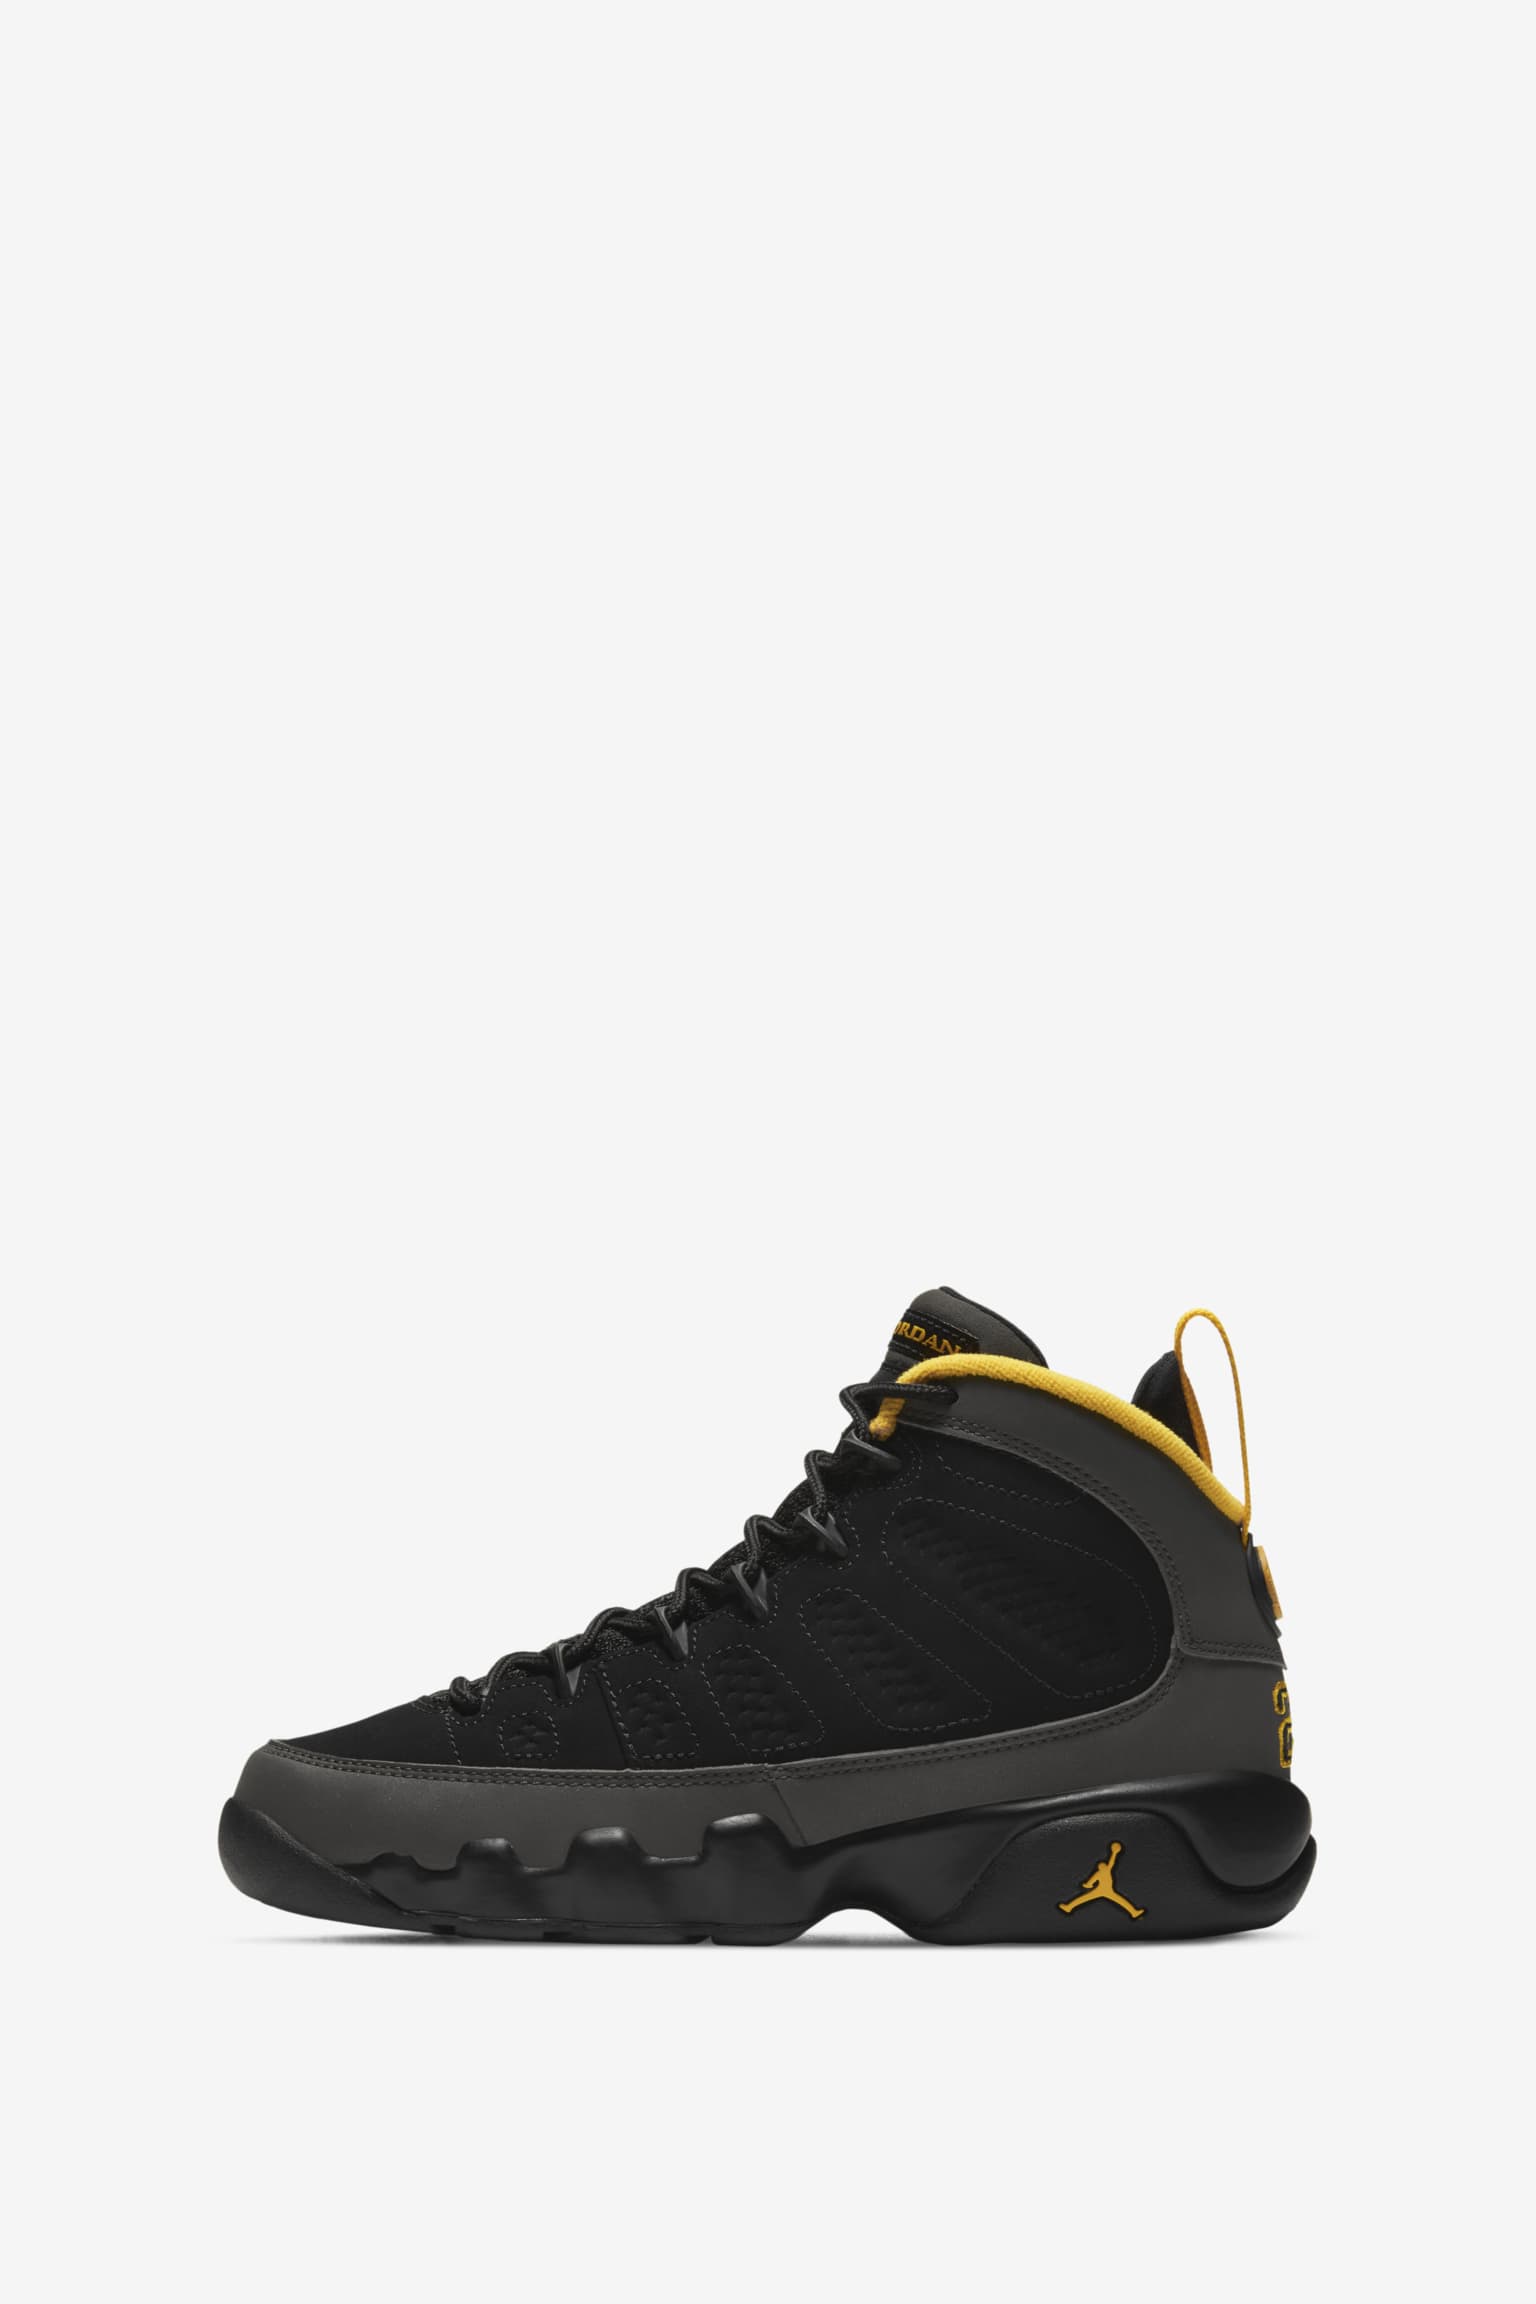 black and gold 9s